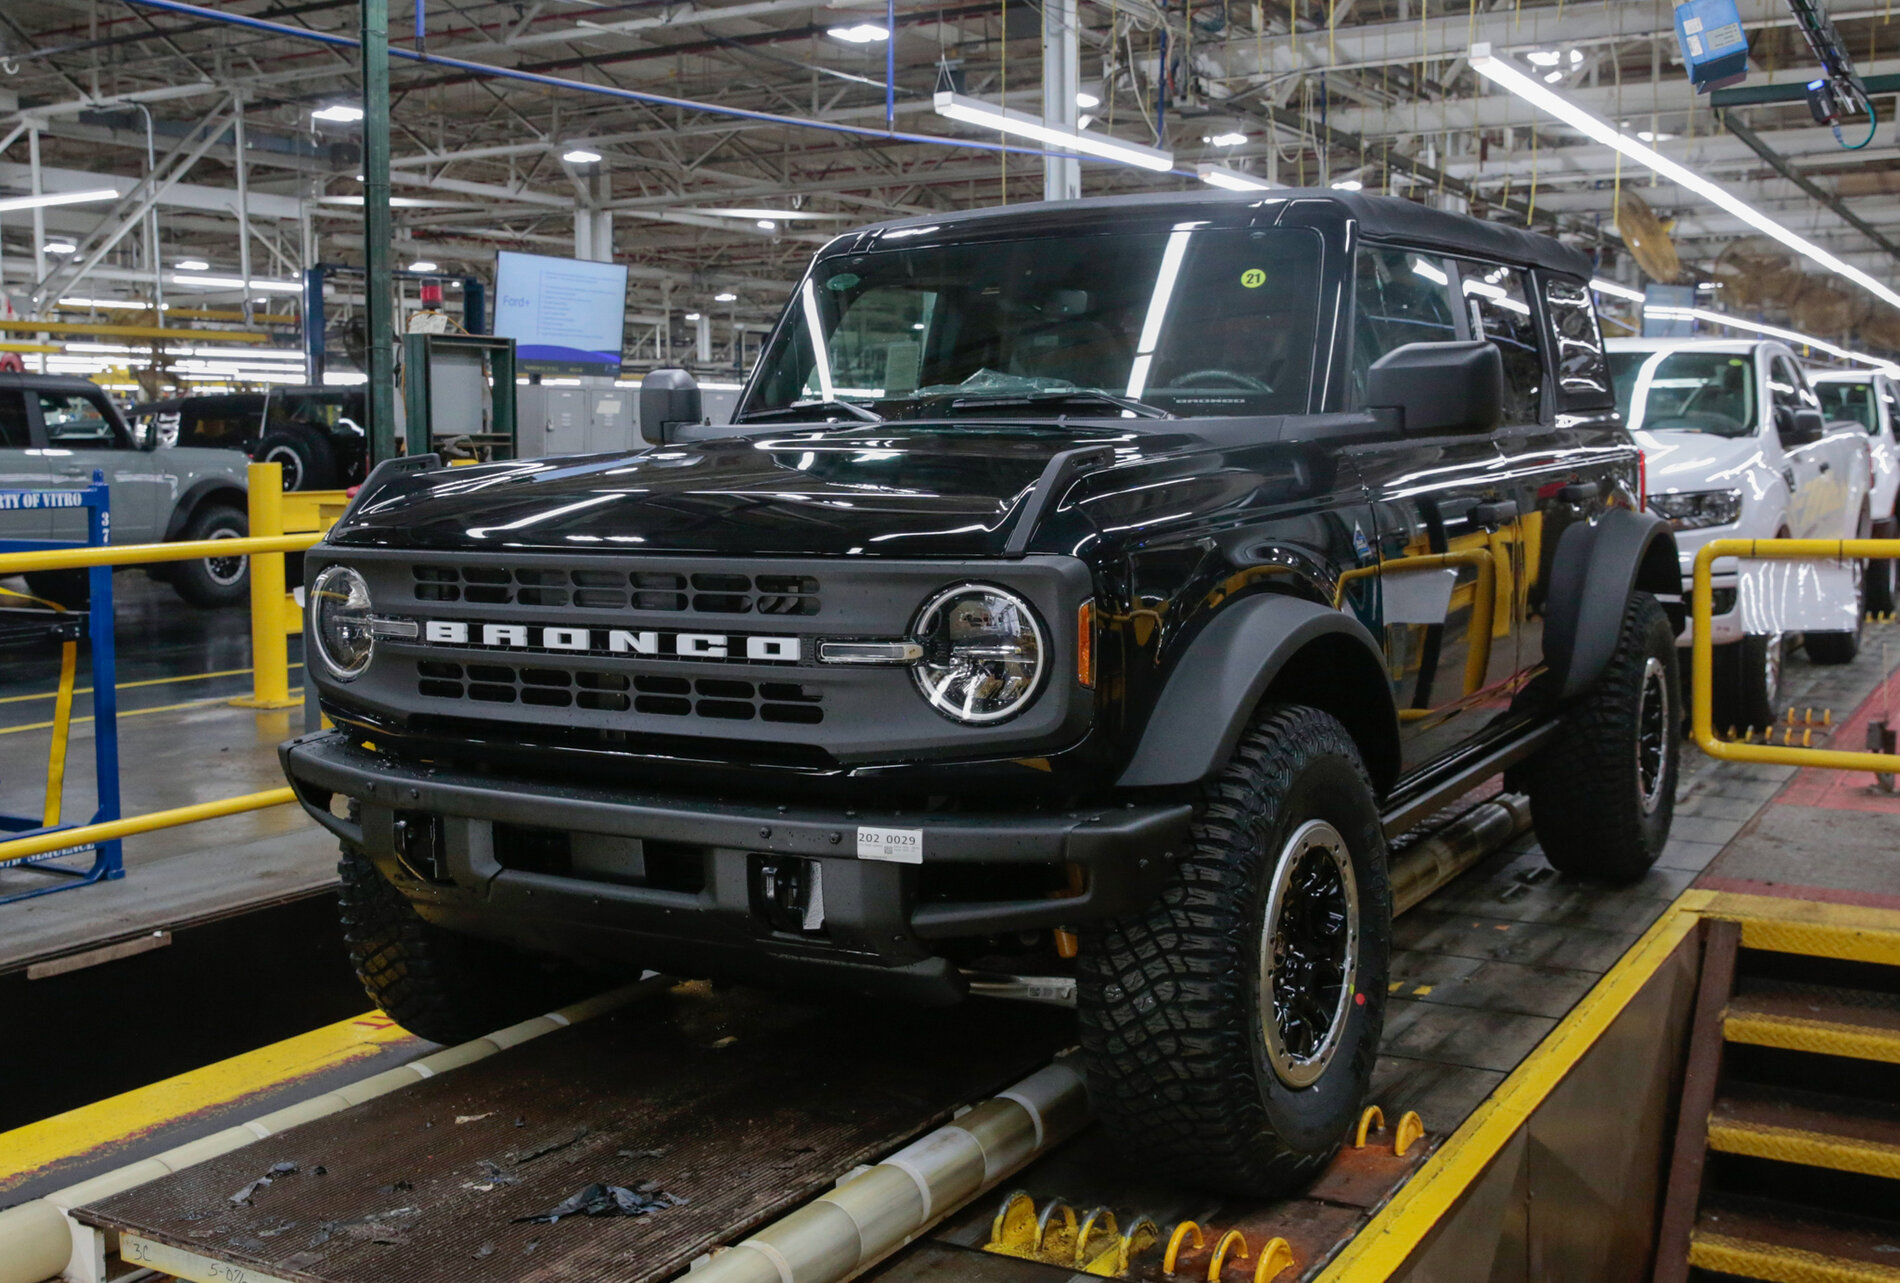 Ford Bronco Post Your Bronco Production Line Pics! (From Ford Emails Starting Today) A938803A-C85F-4E95-8447-75B6126574B6